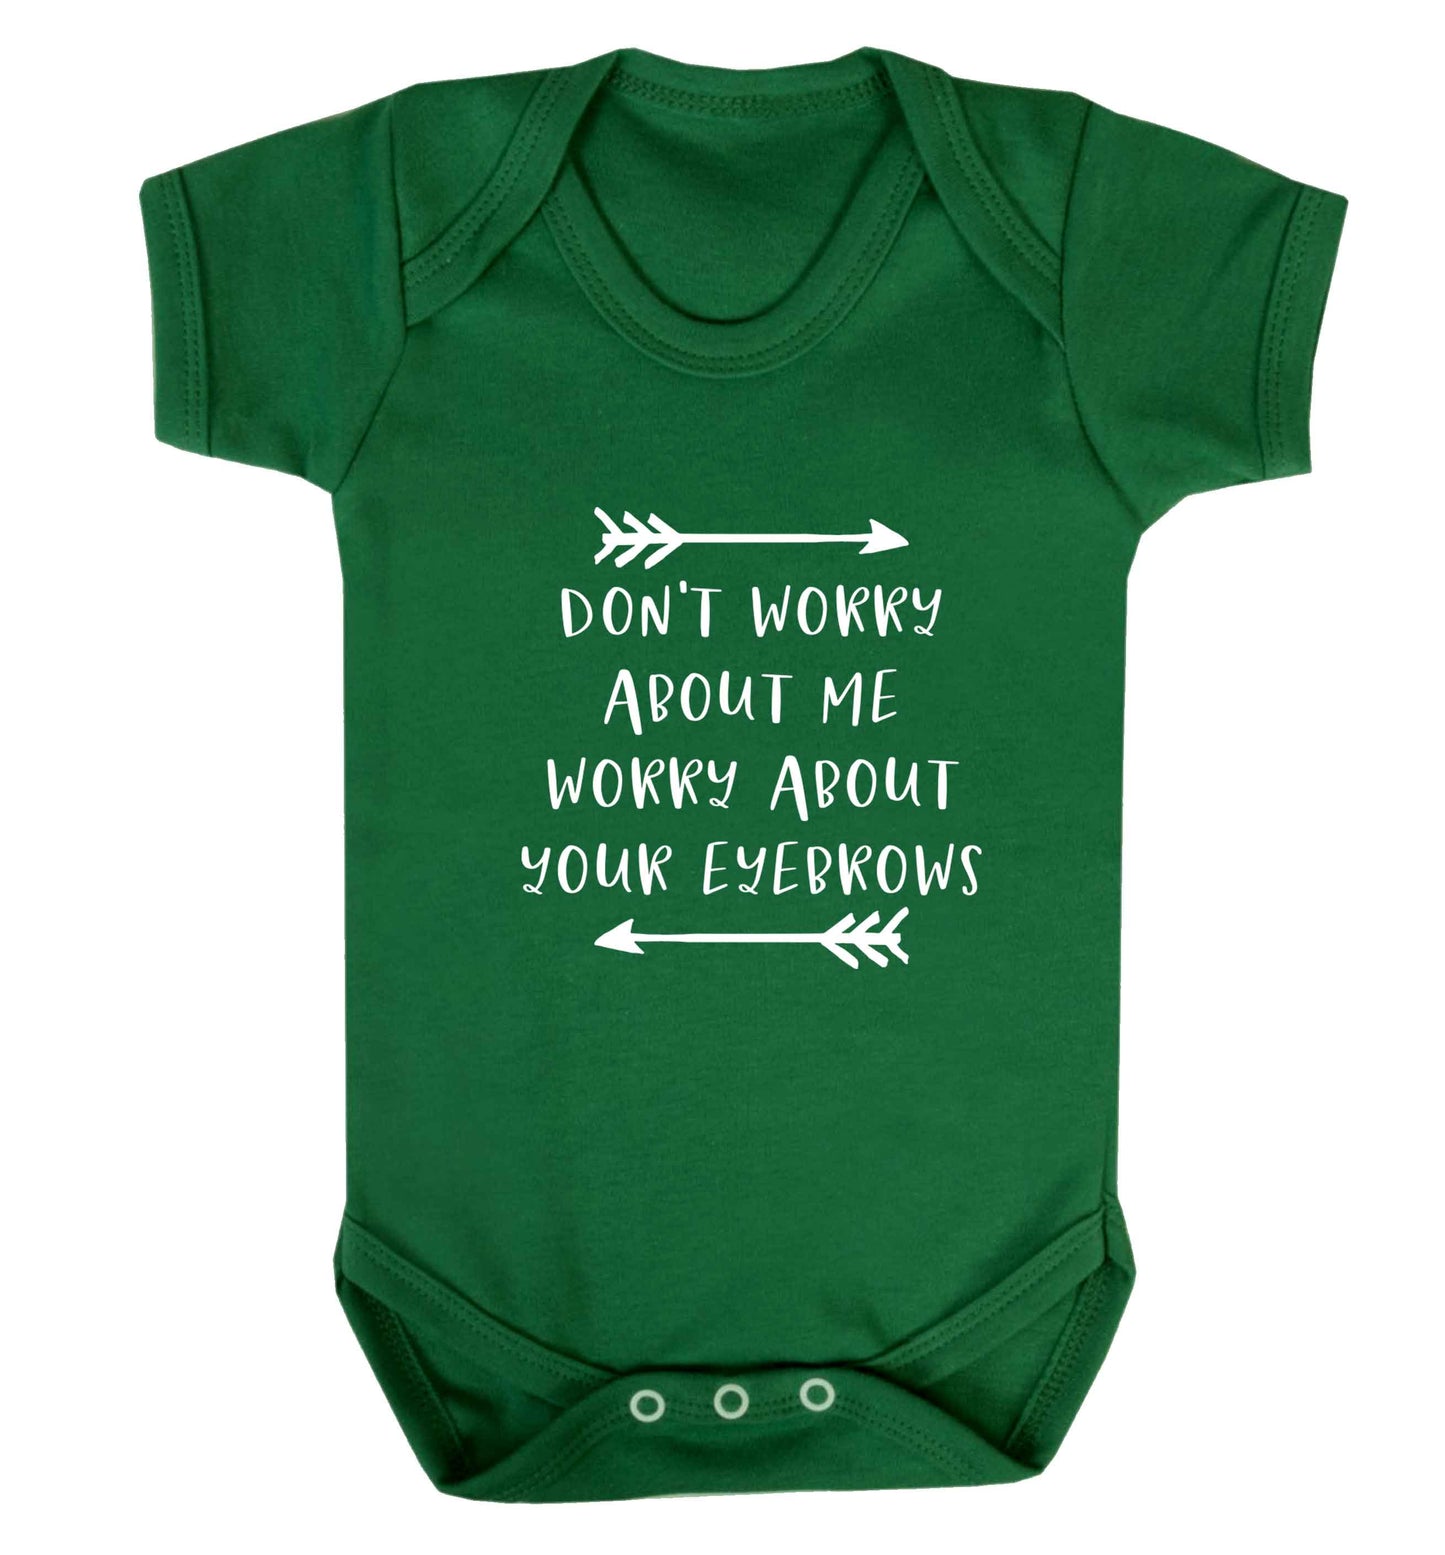 Don't worry about me worry about your eyebrows baby vest green 18-24 months